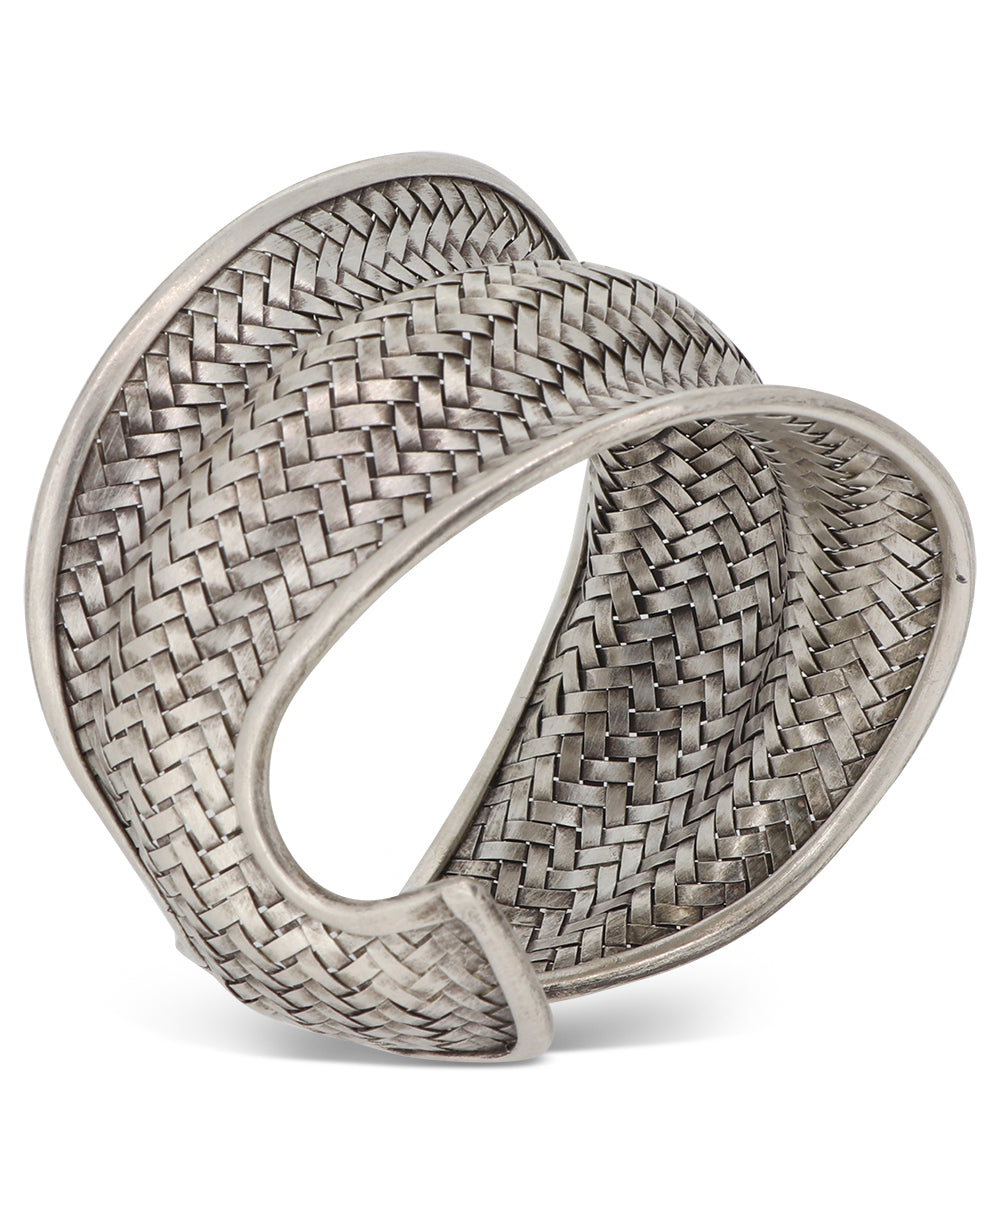 Ethically sourced silver adjustable bracelet from Laos, showcasing intricate craftsmanship